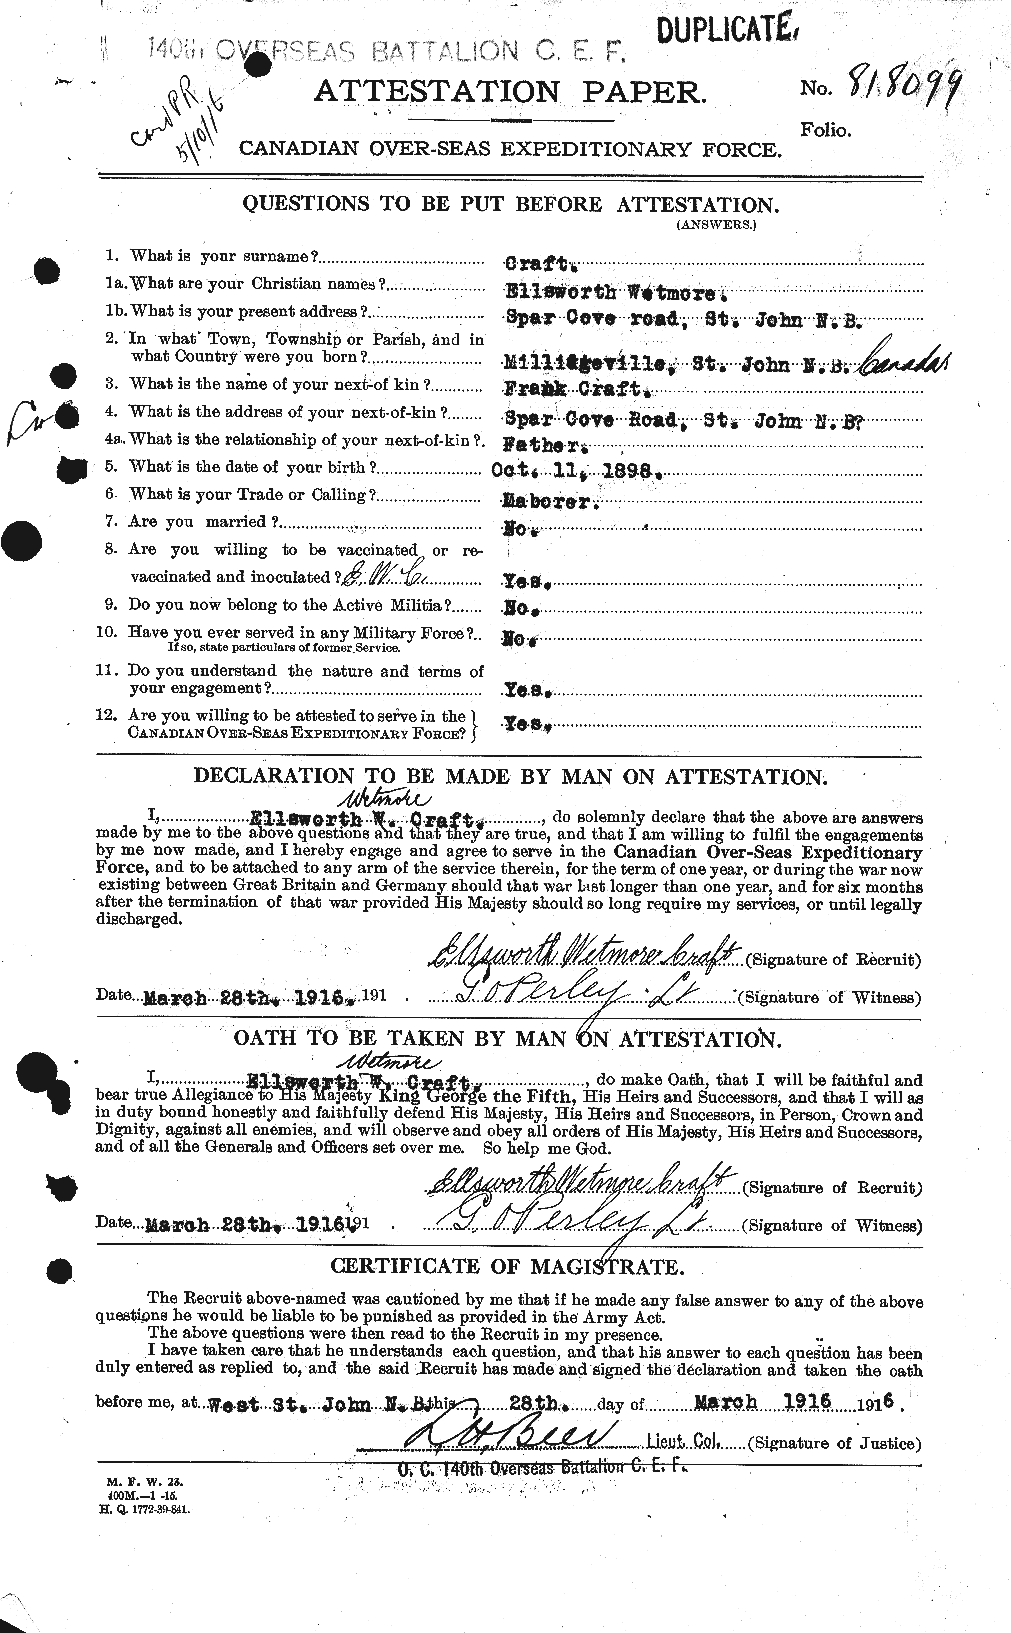 Personnel Records of the First World War - CEF 062885a